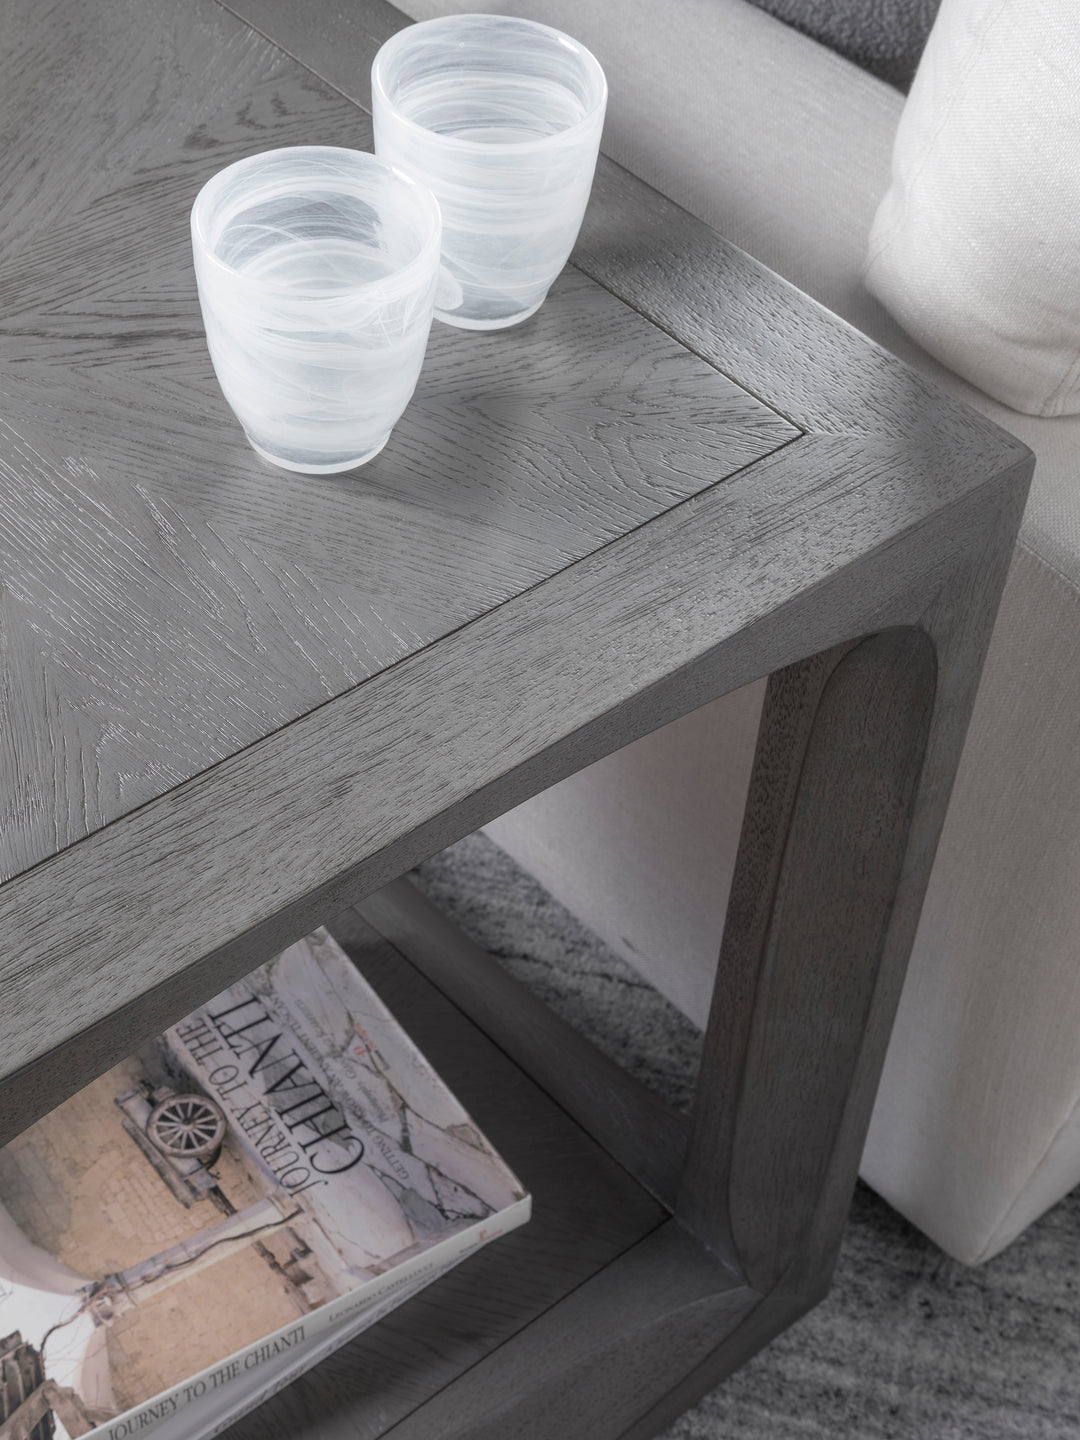 American Home Furniture | Artistica Home  - Appellation Square End Table